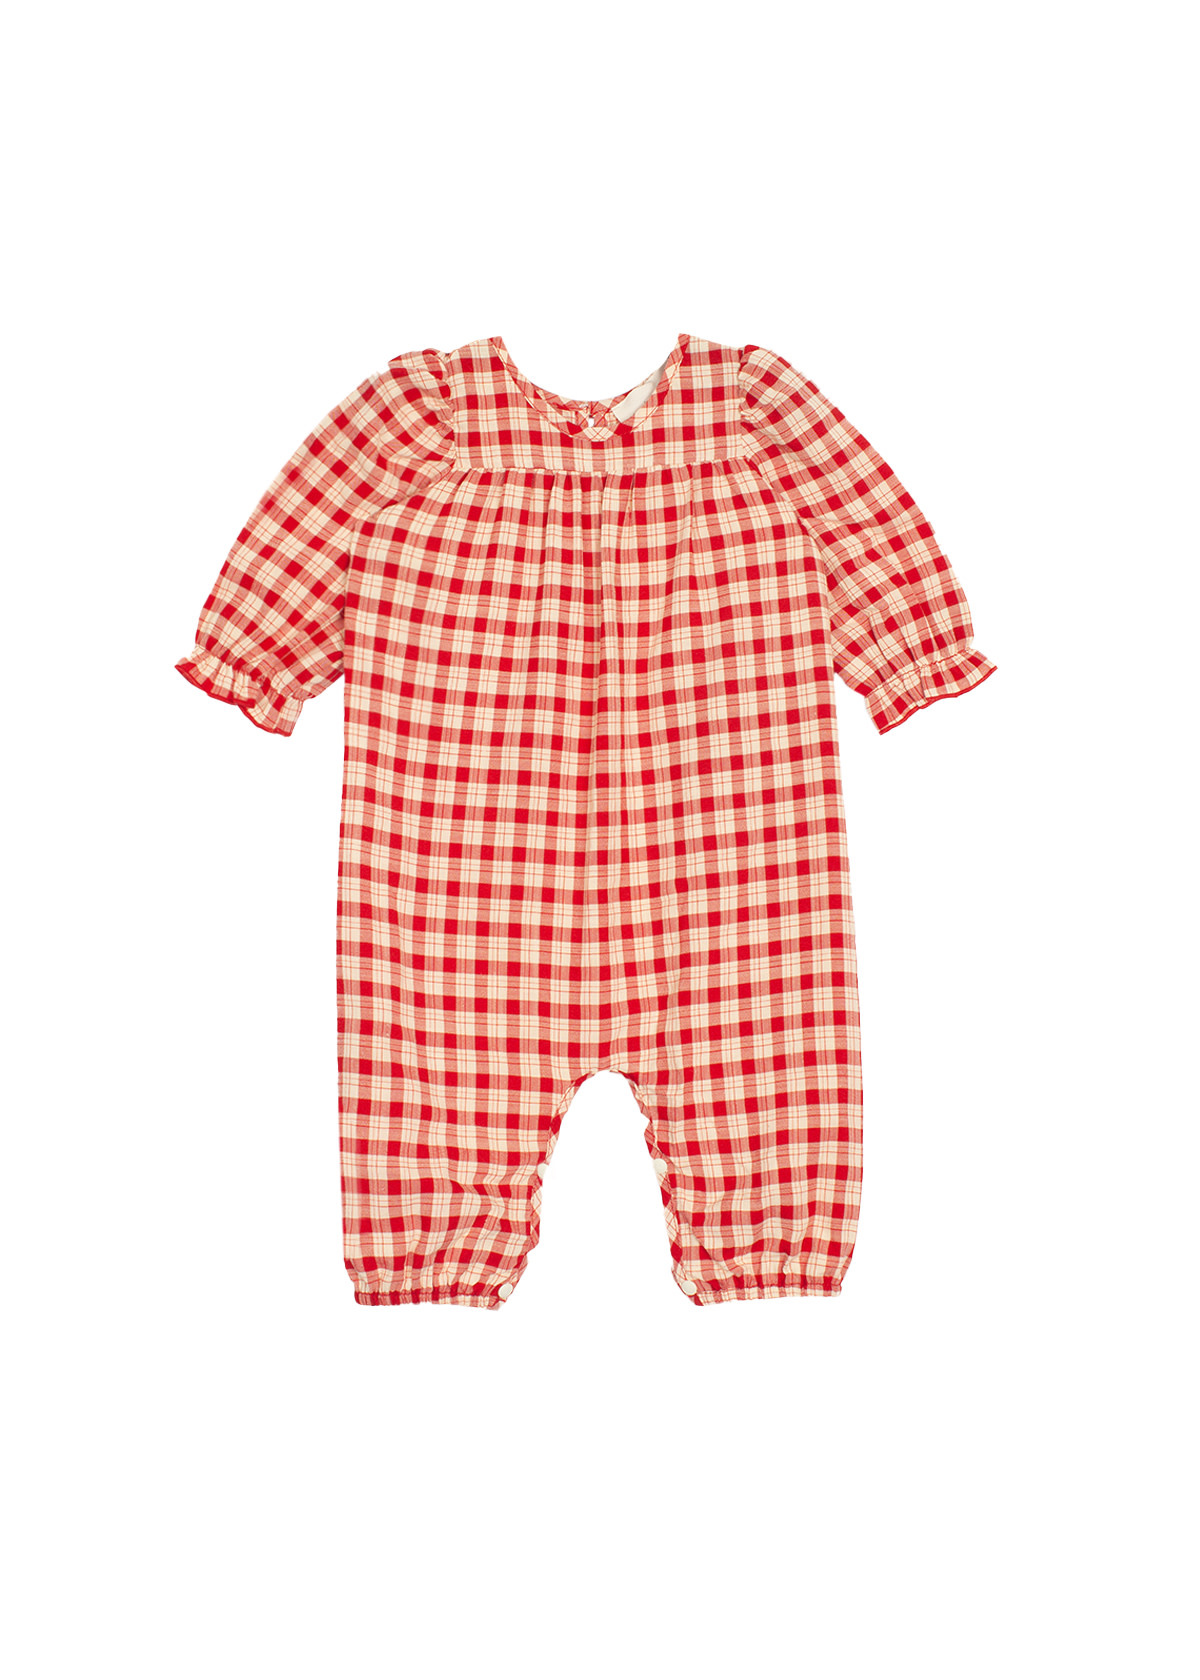 Mabel and Honey Checked Woven Plaid Romper